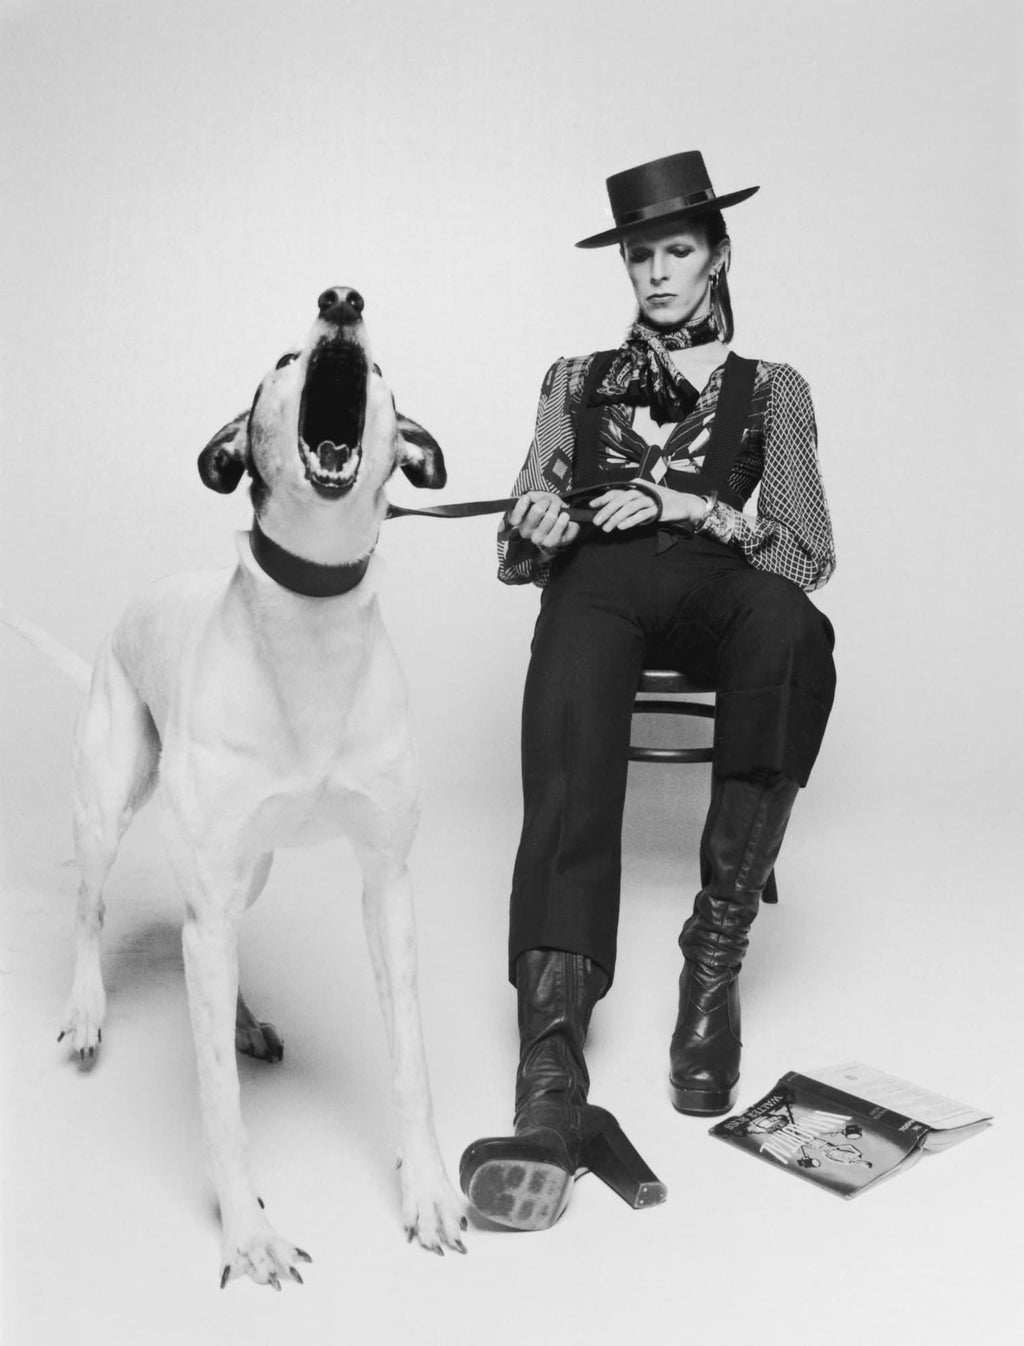 David Bowie for Diamond Dogs, By Terry O'Neill, photo, fine art, print, black and white, bowie, dog, limited edition, signed print, collectors, hat, art gallery, los angeles,  LA MAISON REBELLE